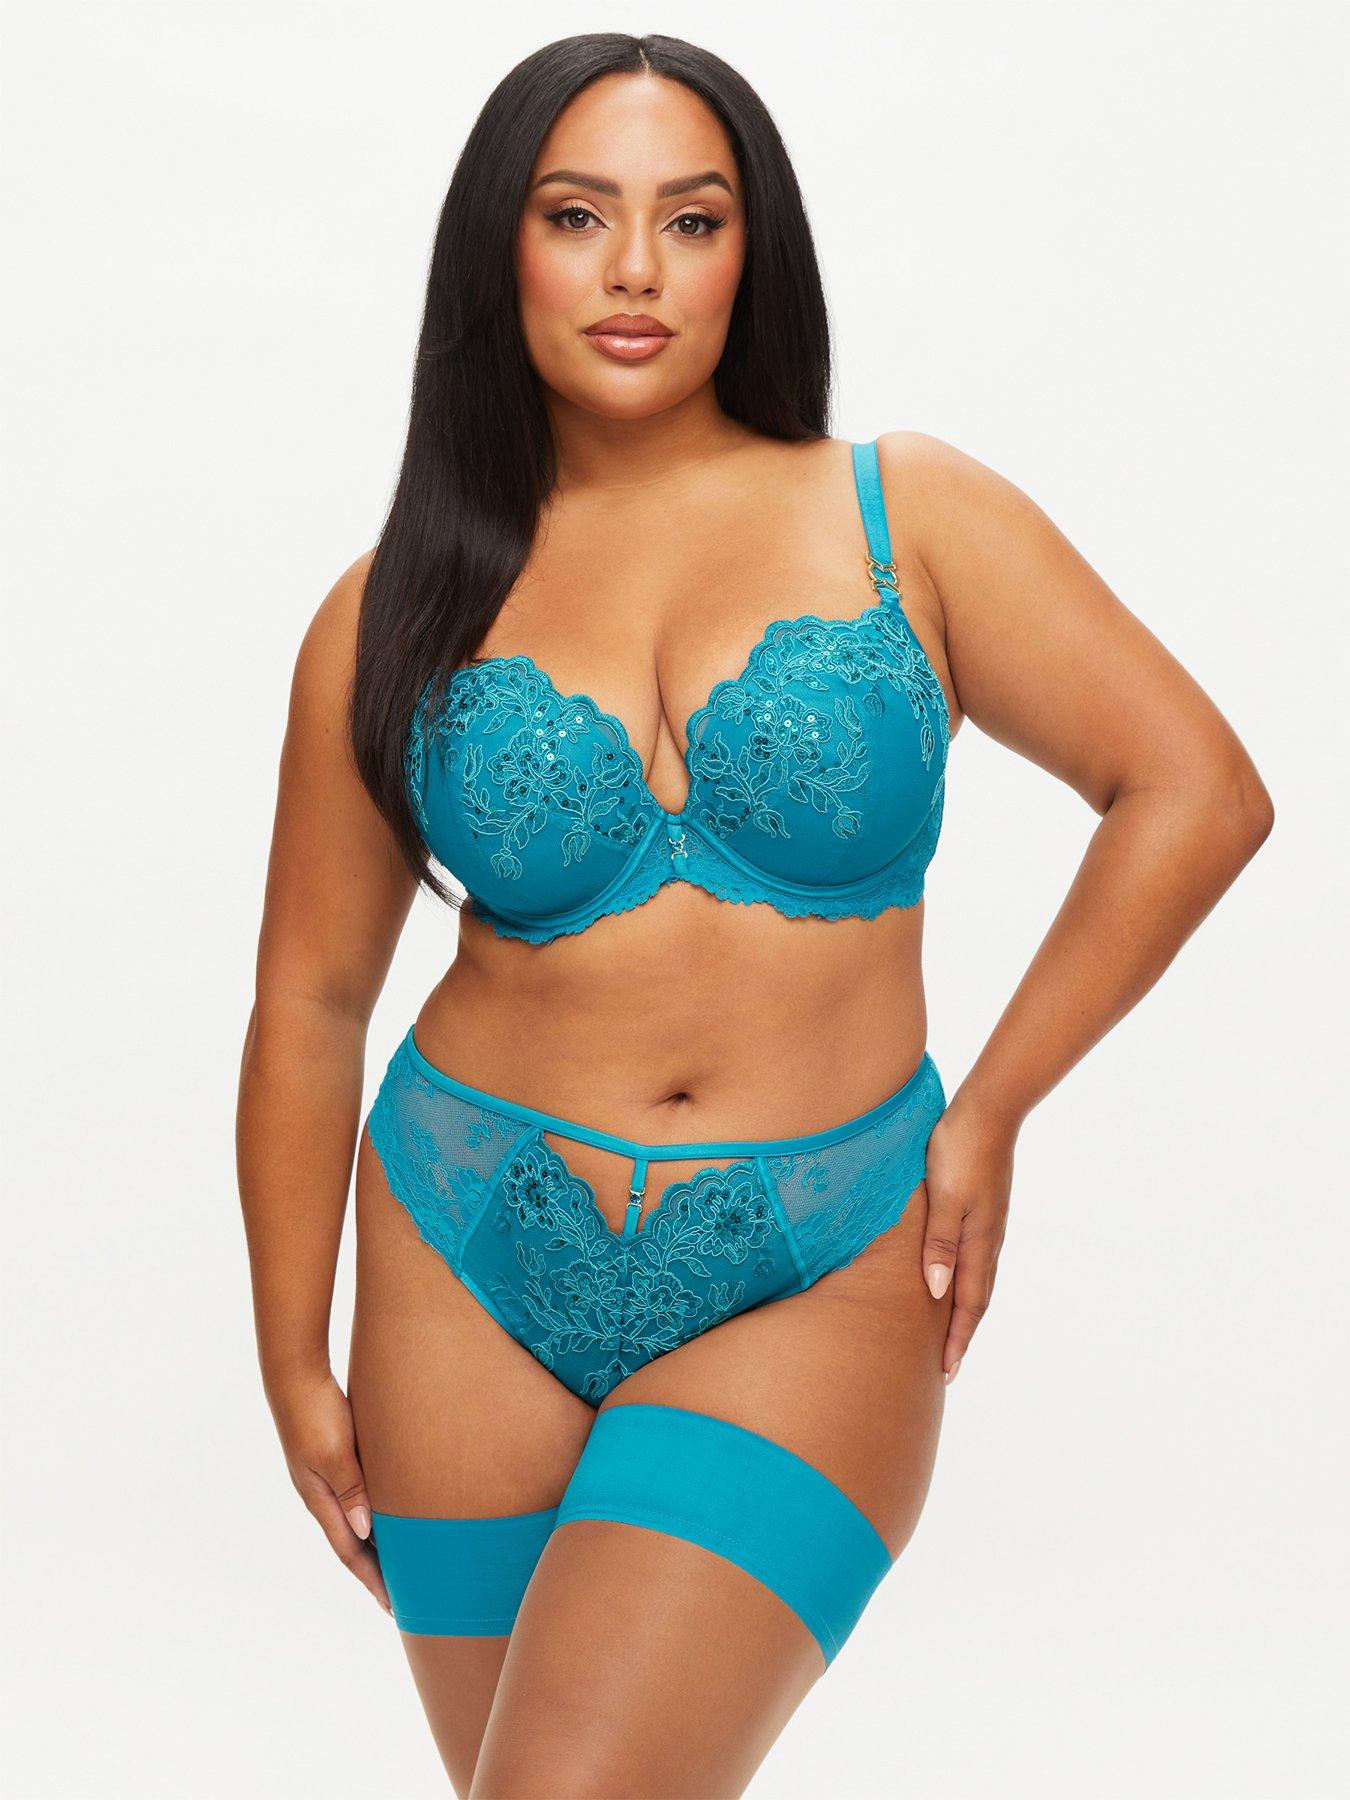 Ann Summers Bras ICON FULLER BUST PADDED PLUNGE - Bright Blue